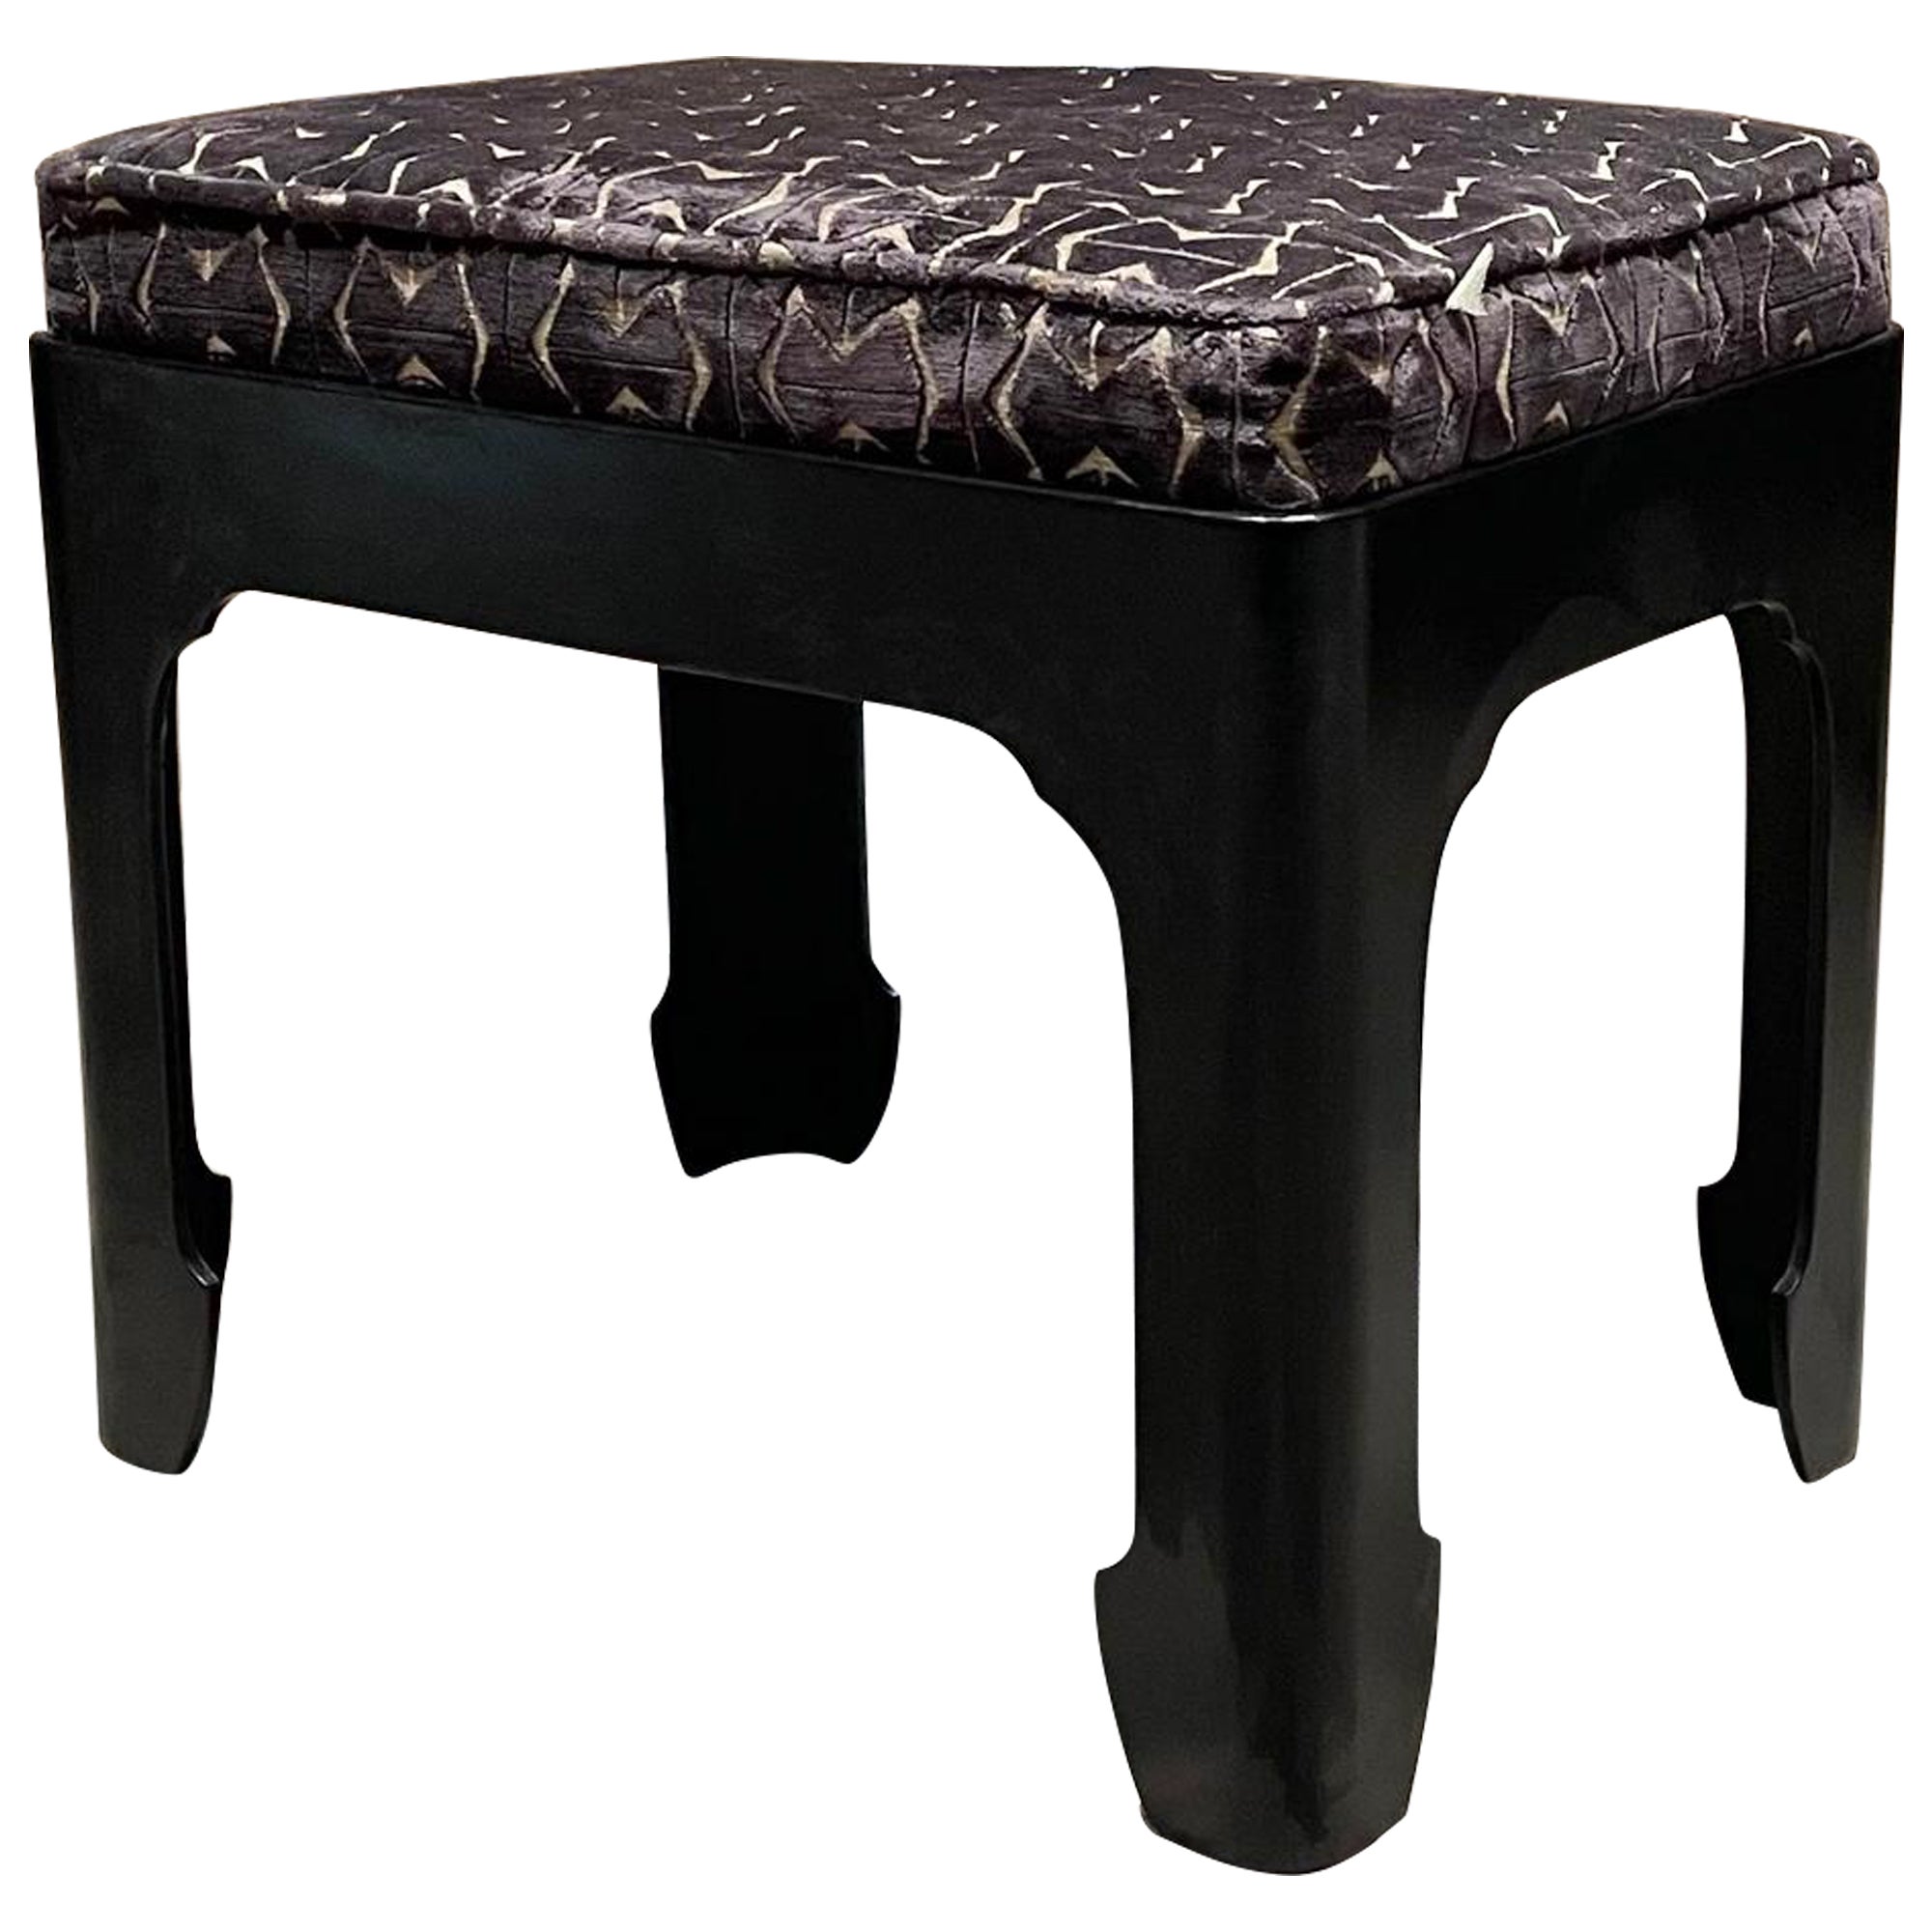 Italy Fabulous Black Fancy Vanity Stool Style of Edward Wormley for Dunbar 1950s For Sale